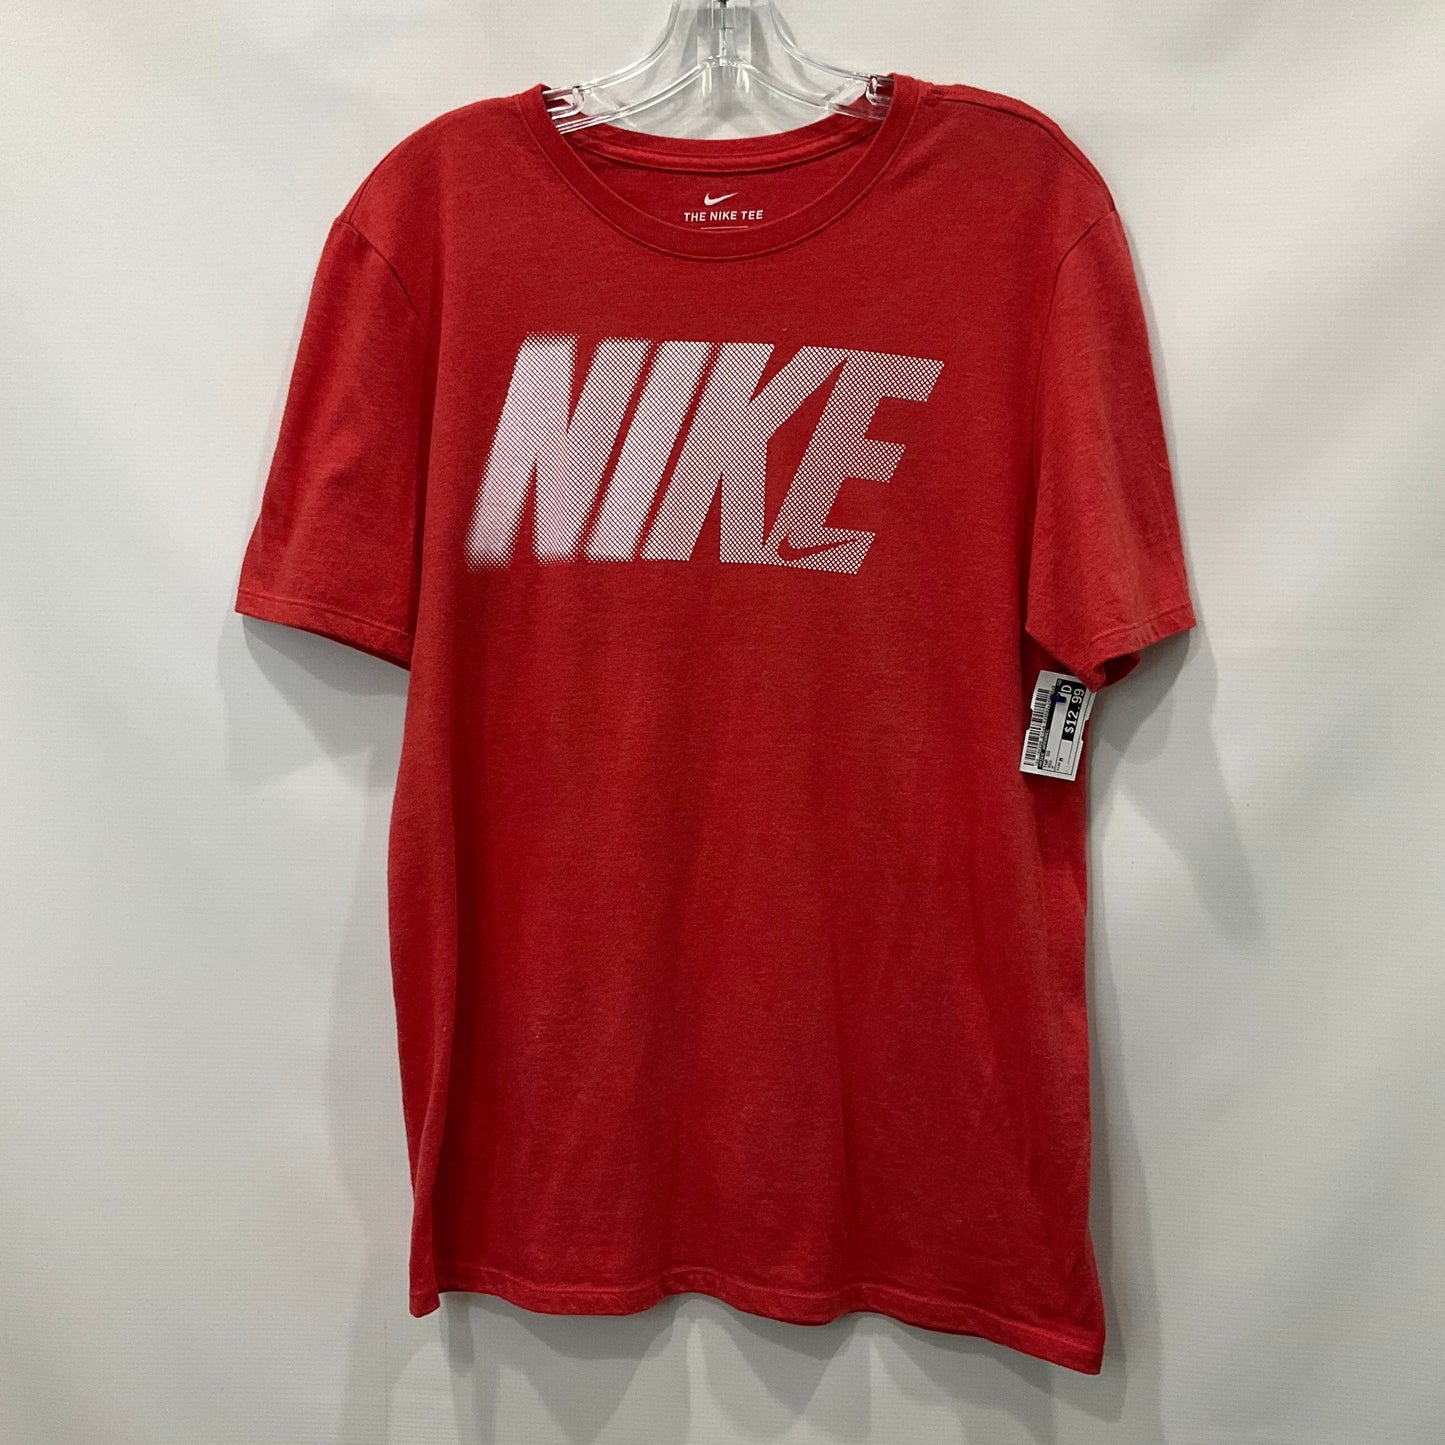 Red Top Short Sleeve Nike Apparel, Size M